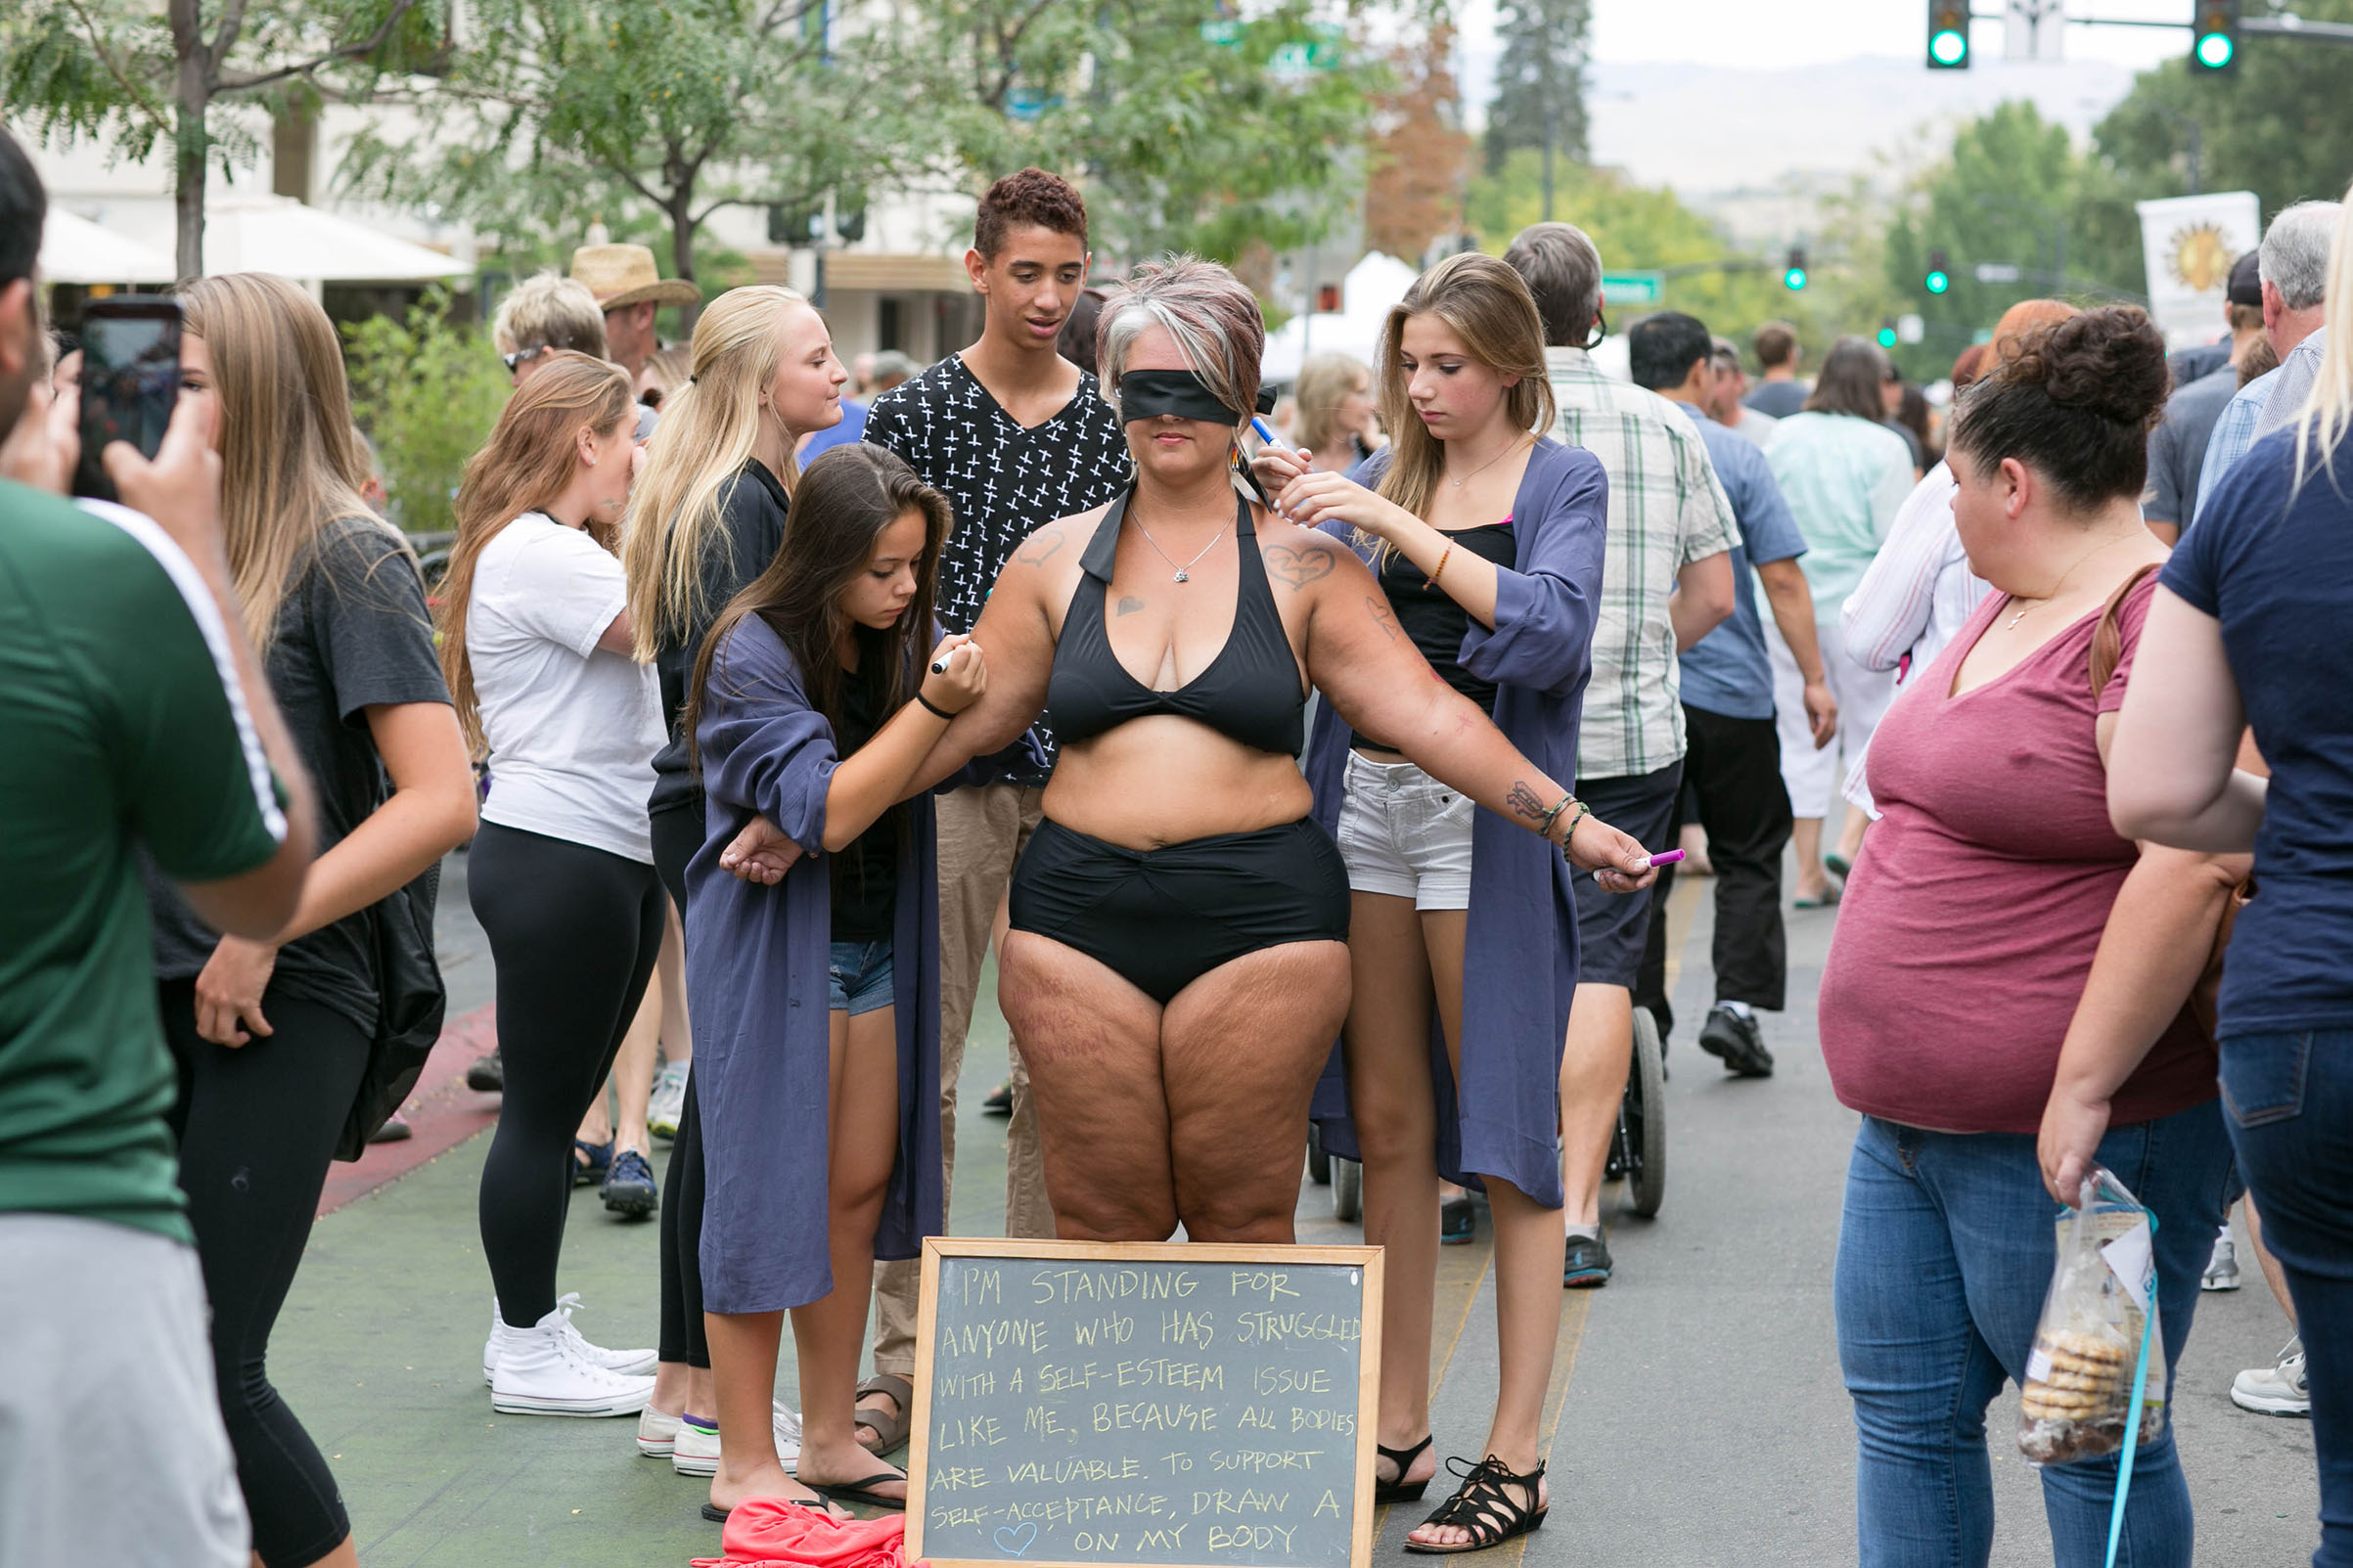 Body image activist Amy Pence-Brown participating in her "self-love performance art piece" in Capital City Public Market in Boise, Idaho on Aug. 29, 2015. (Melanie Folwell)